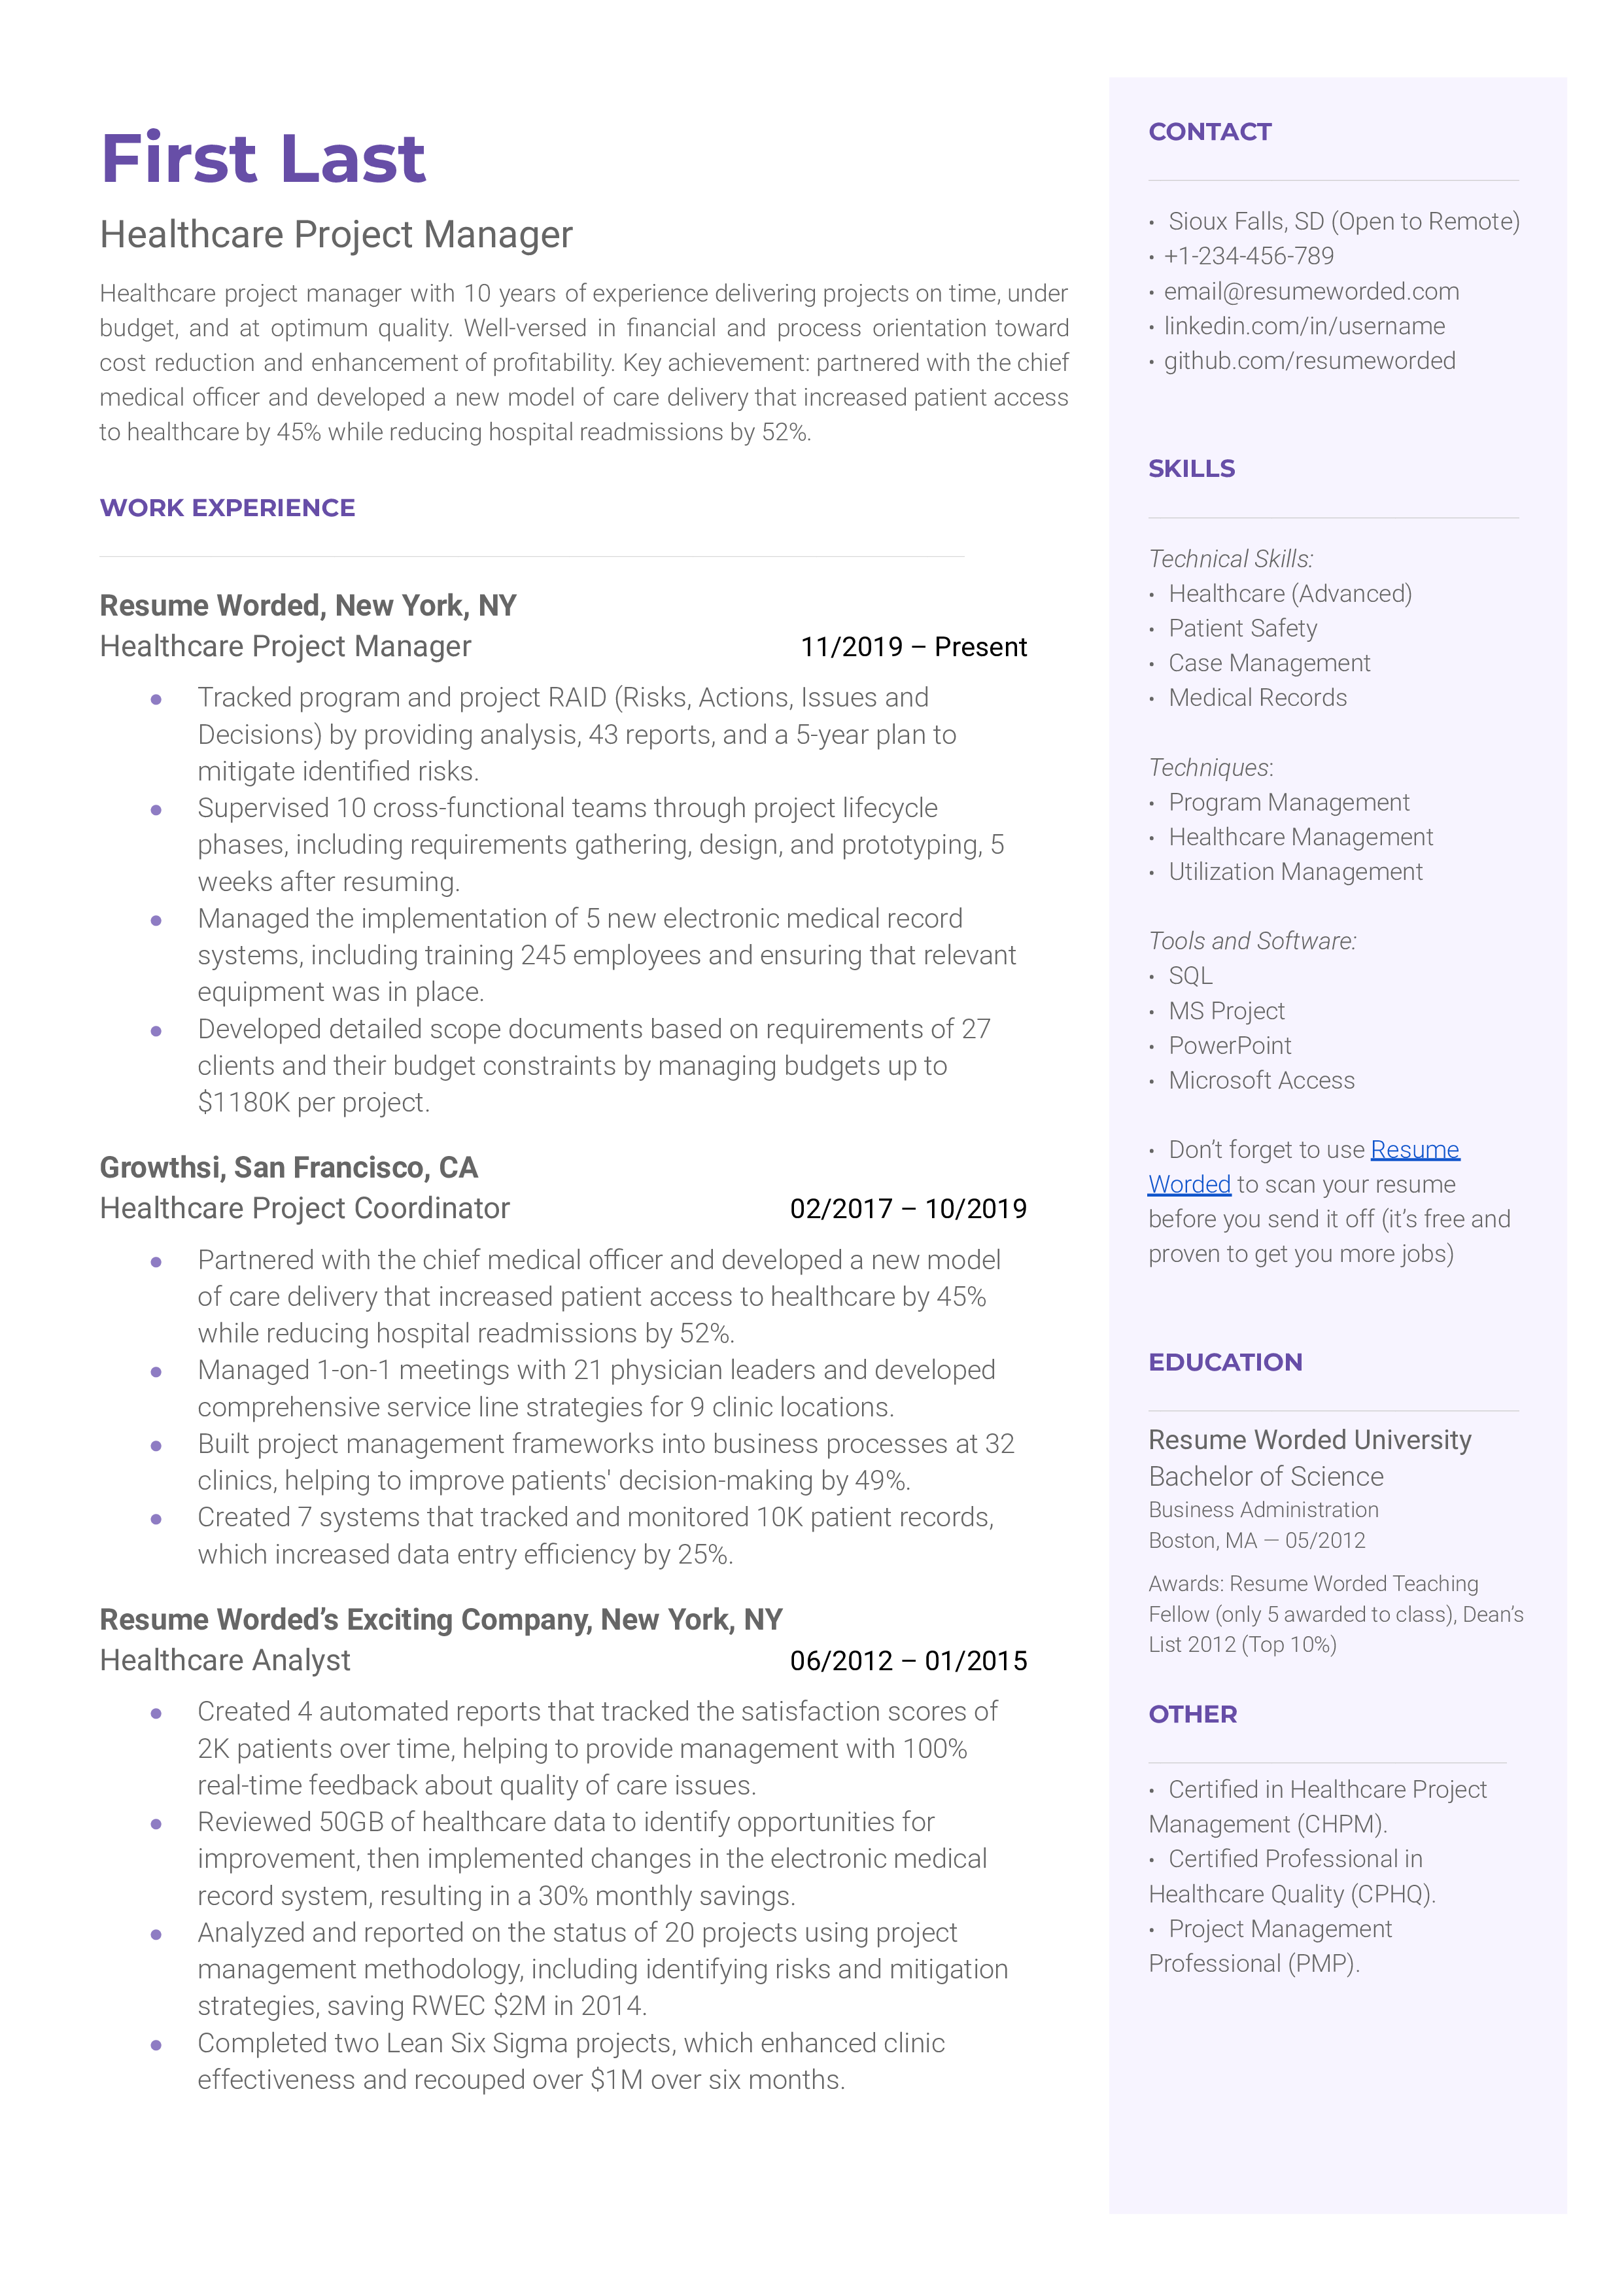 Healthcare Project Manager Resume Template + Example